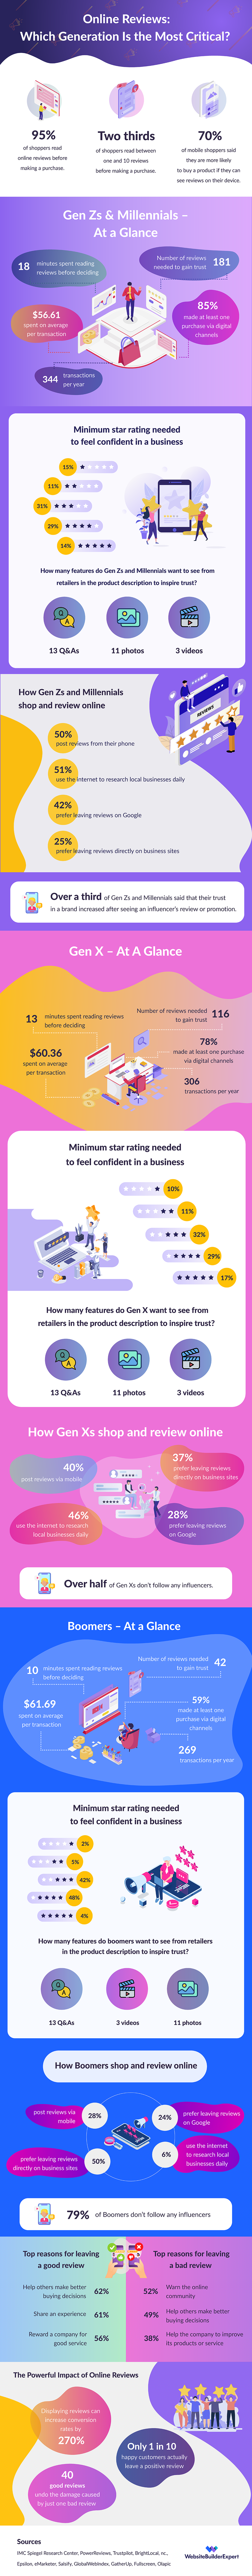 how to use online reviews to market to different generations infographic